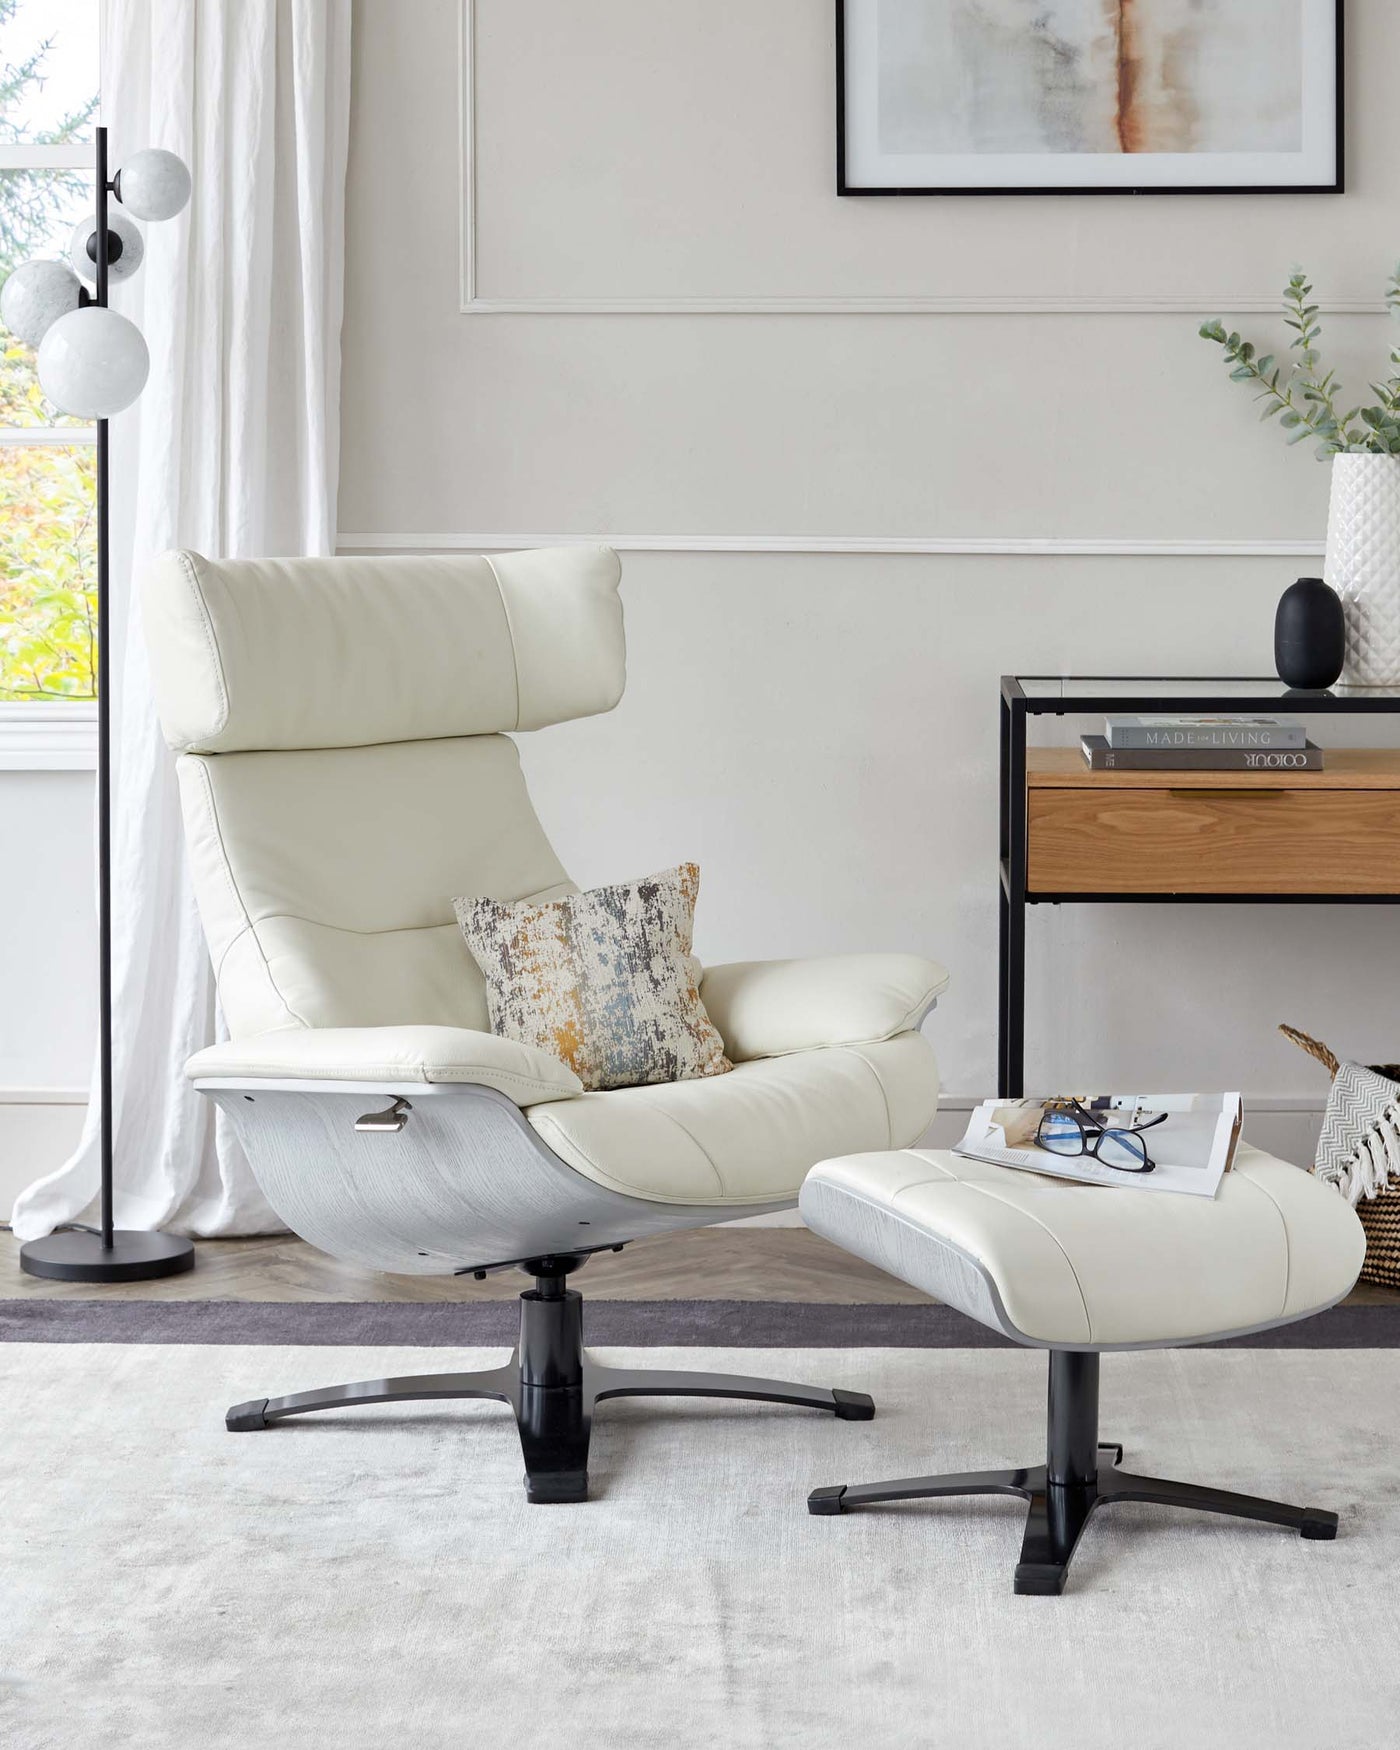 Modern cream leather reclining chair with a matching footstool, featuring a curved wooden base and black metal details. A sleek black and wood side table sits next to it, adorned with decorative items and books.